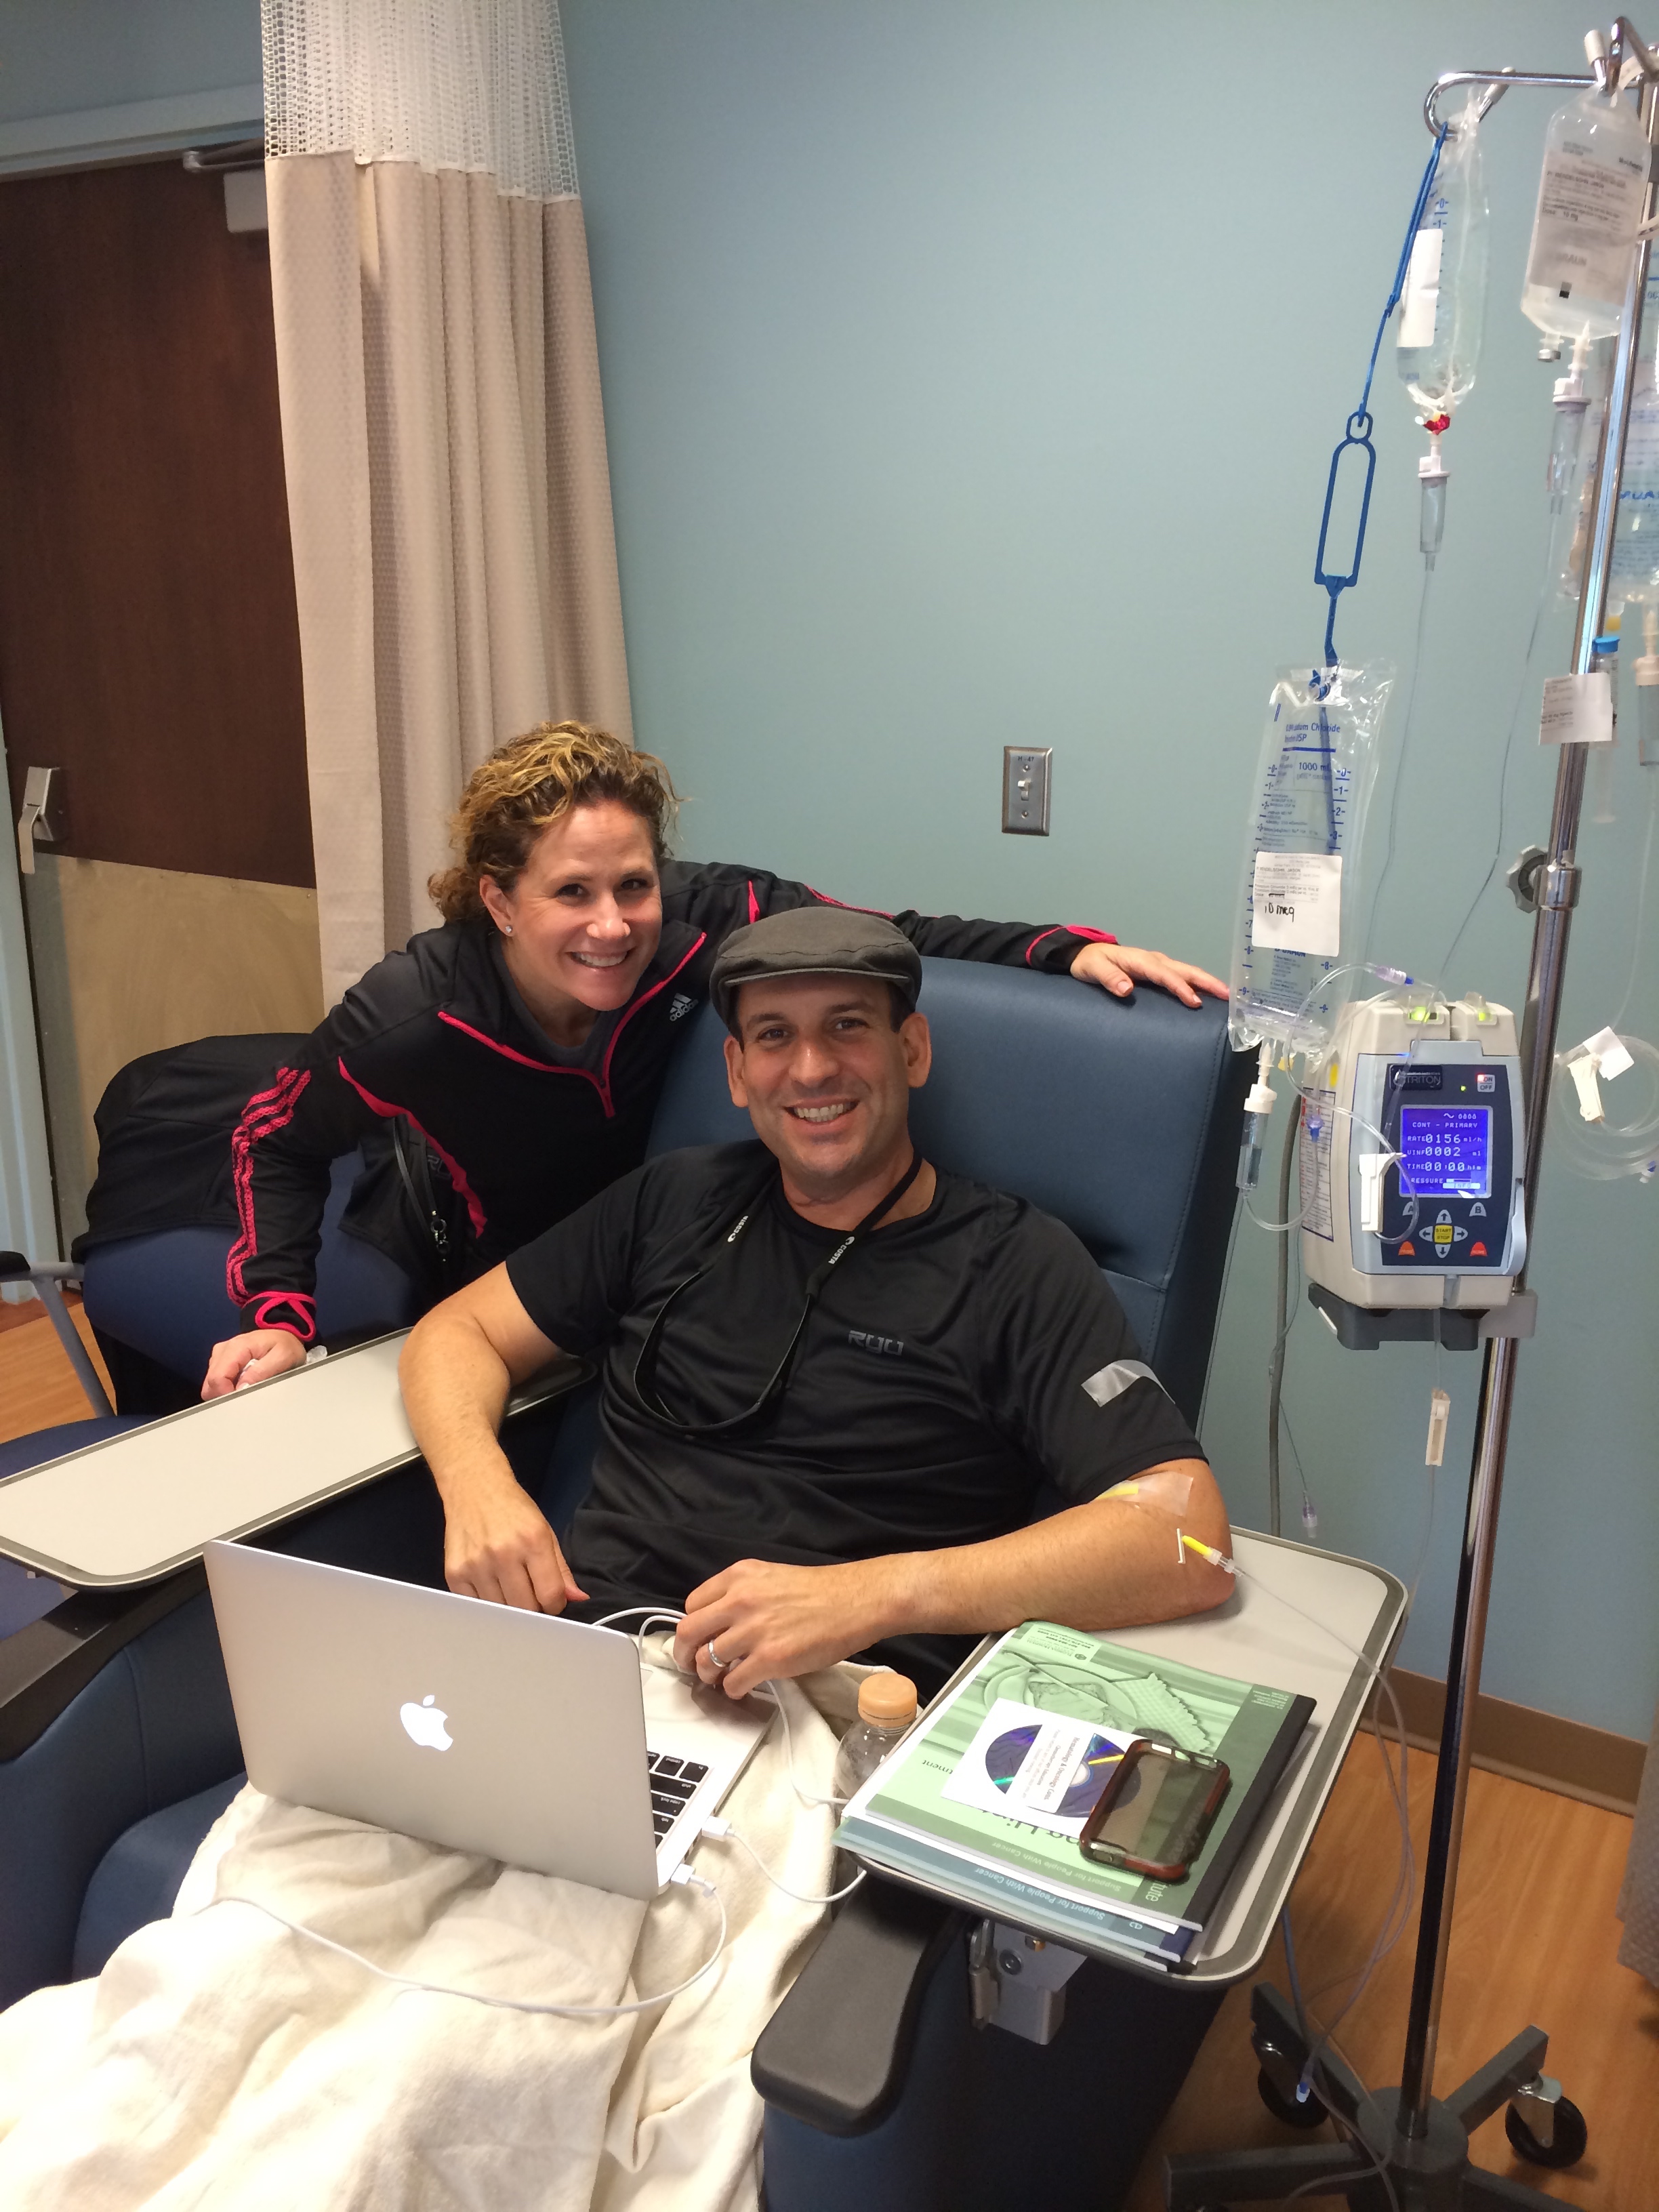 My wife Ronni with me during one of my first chemo appointments. Chemo took place each Thursday for seven weeks. The actually treatment took a few hours, however the entire process took approximately 8 hours. I had chemo immediately after radiation …